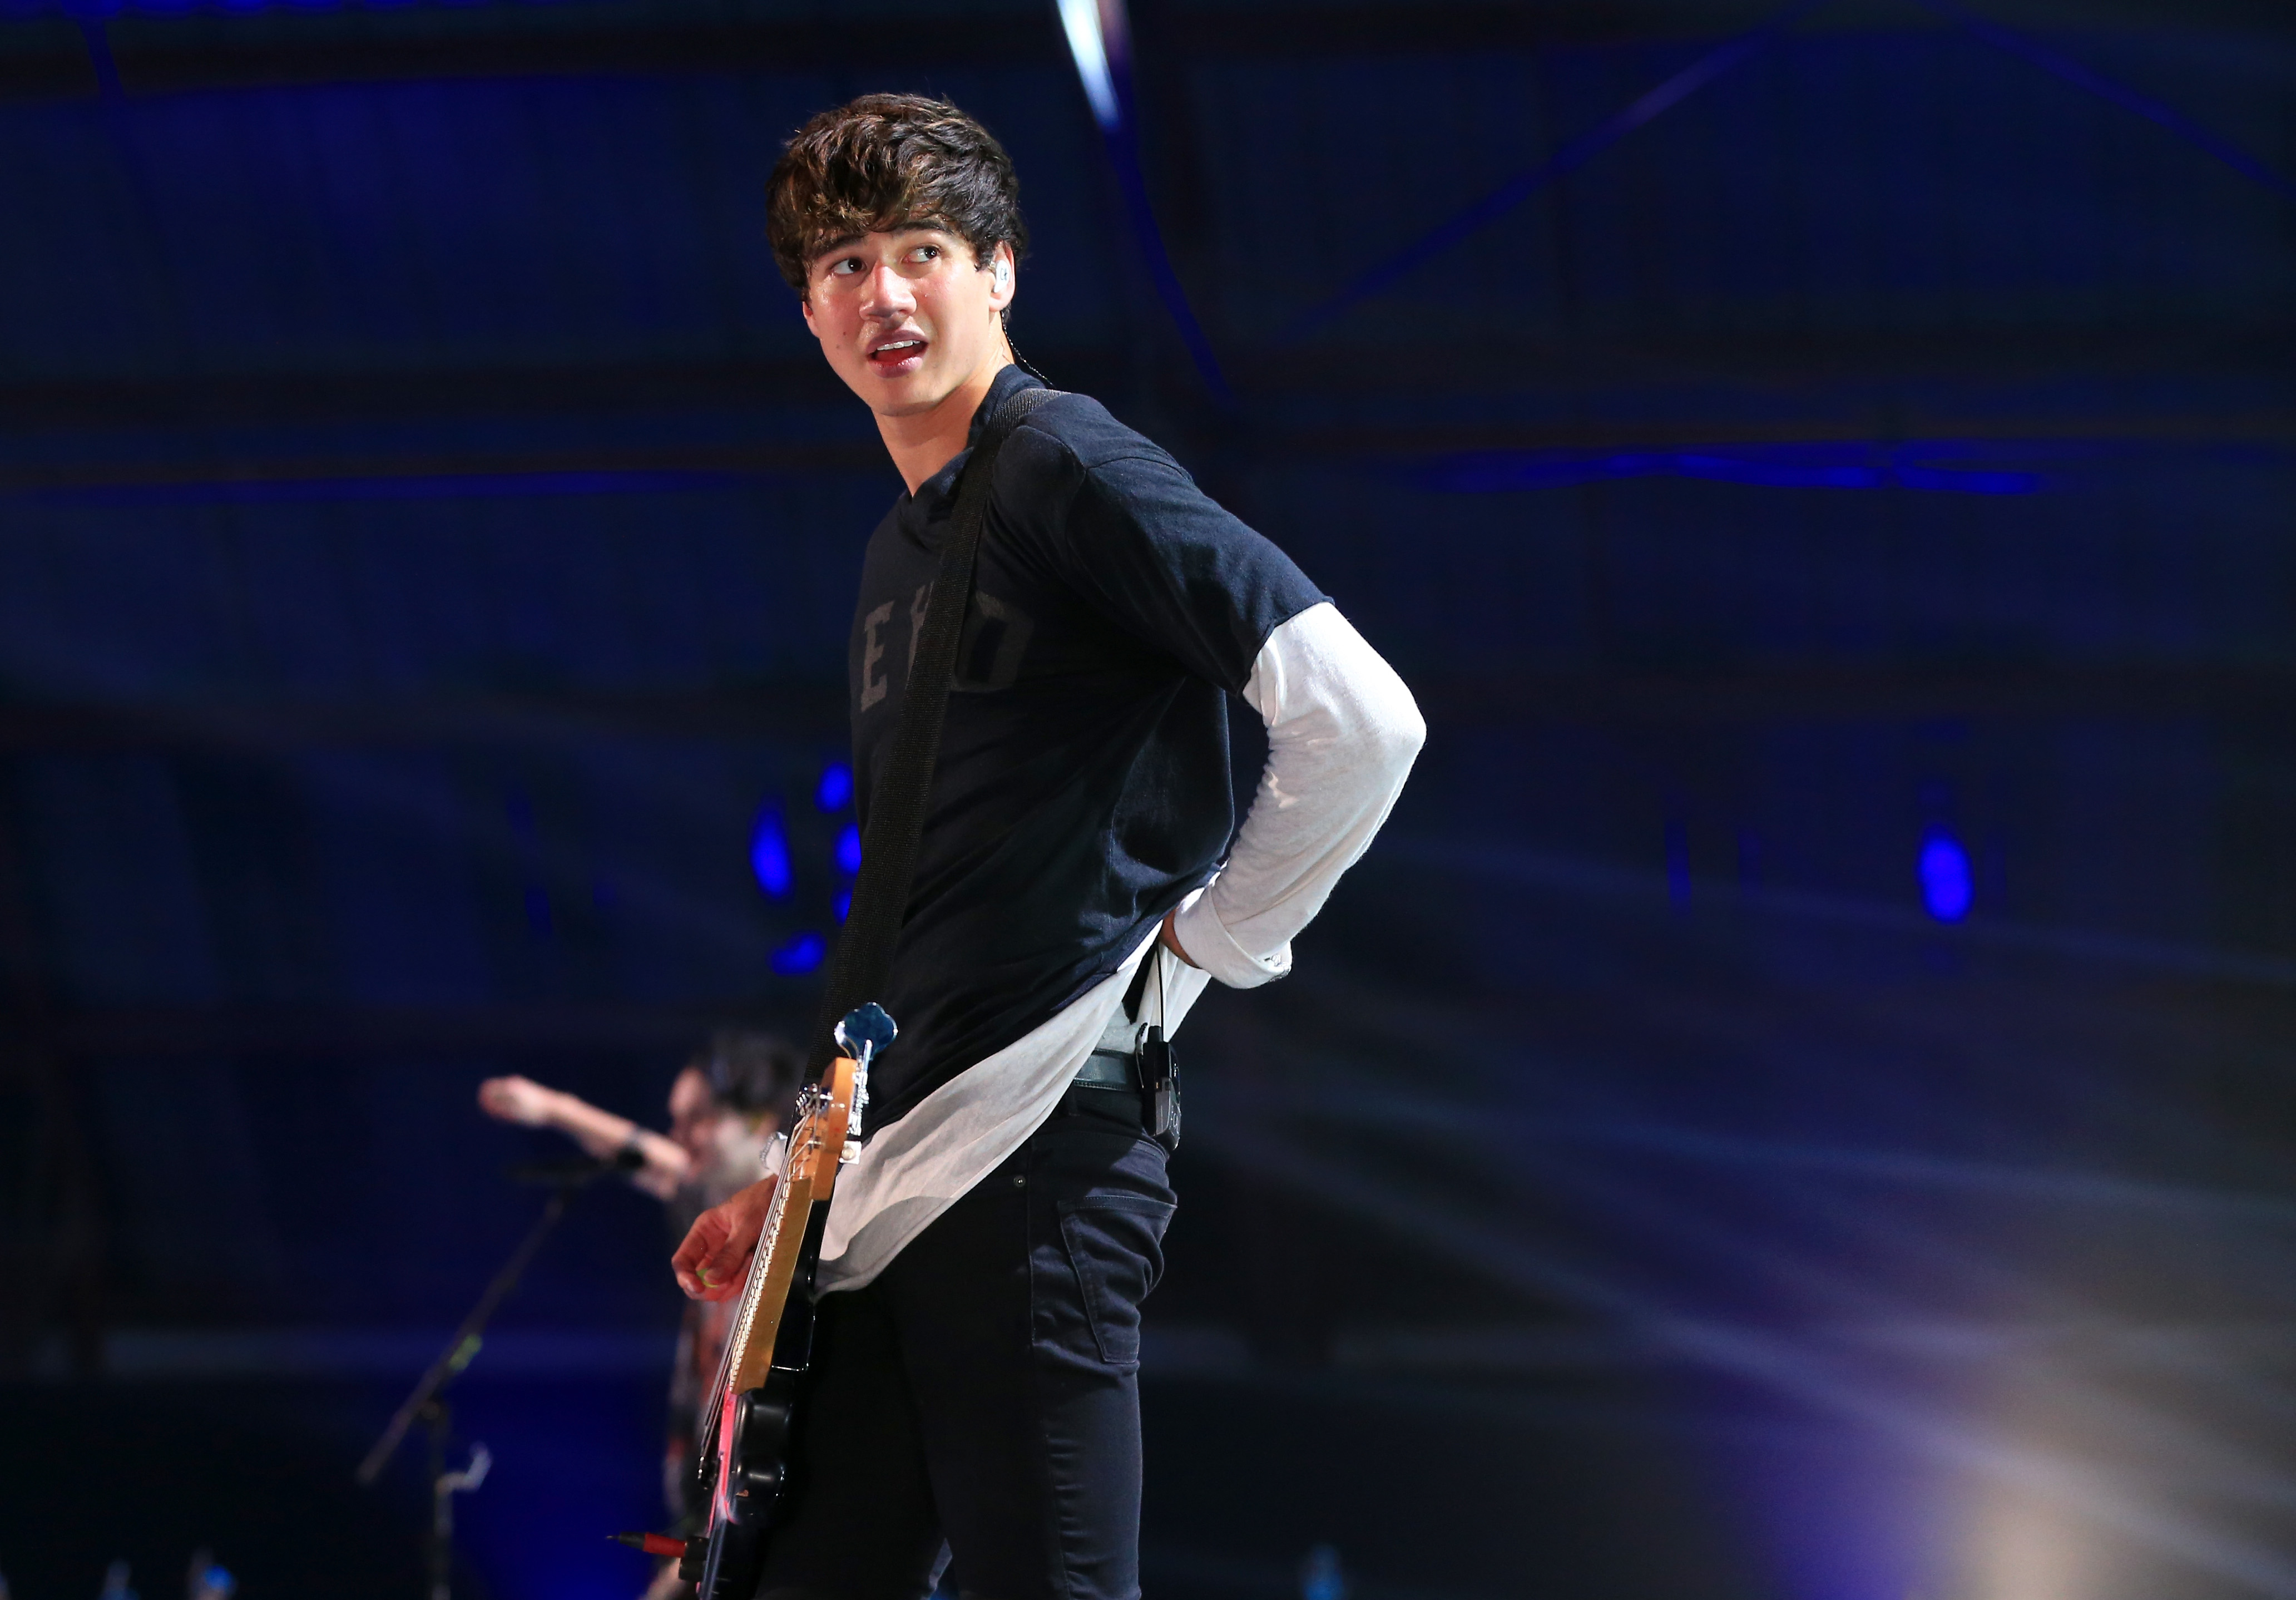 5SOS' Calum Hood Has Fans Worried He's Going To Quit The Band, But